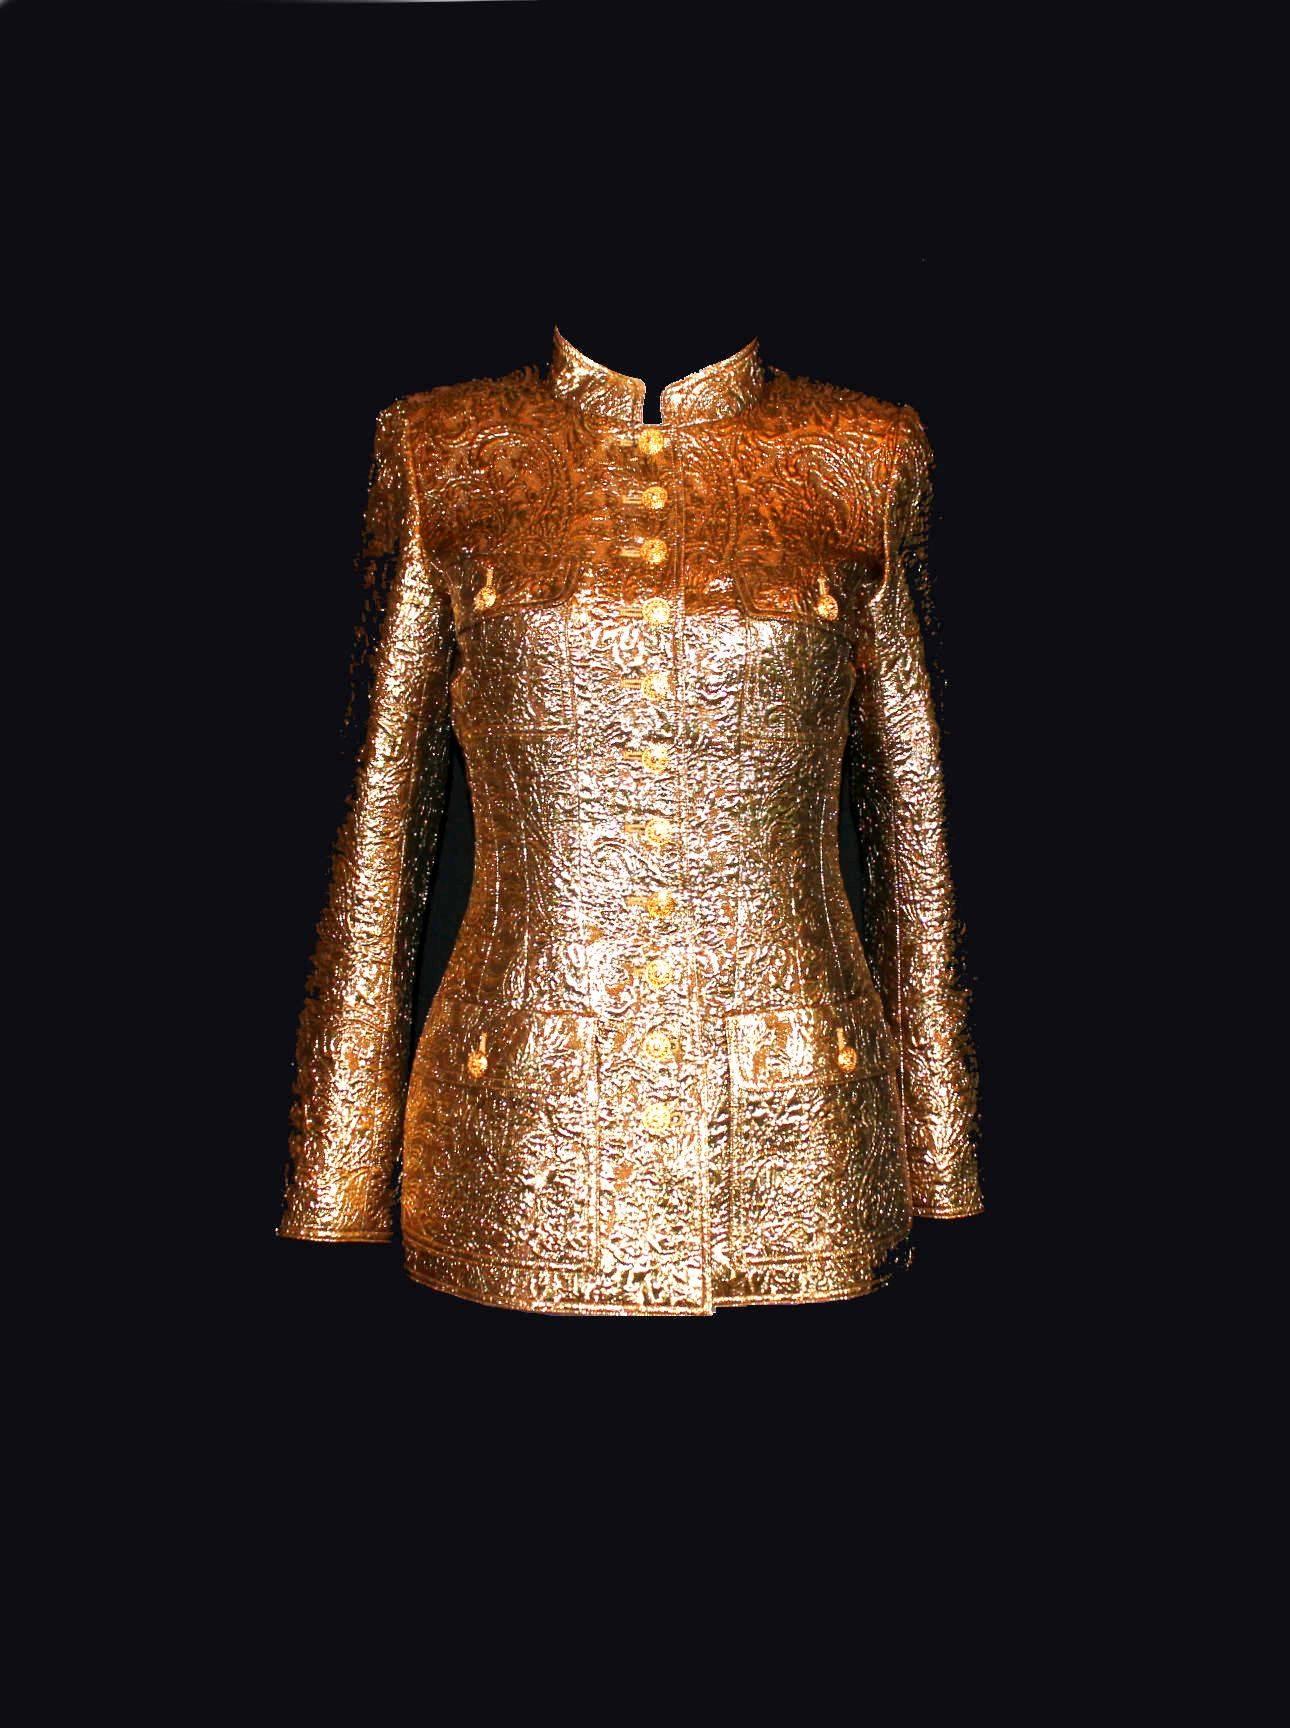 A true icon designed by Karl Lagerfeld for Chanel
Golden metallic jacket
3D structure
Golden buttons in front and on sleeves with CC logo
Fully lined with beige CC logo silk
Seen in the Chanel exhibition in the Metropolitan Museum NYC
Part of the AD